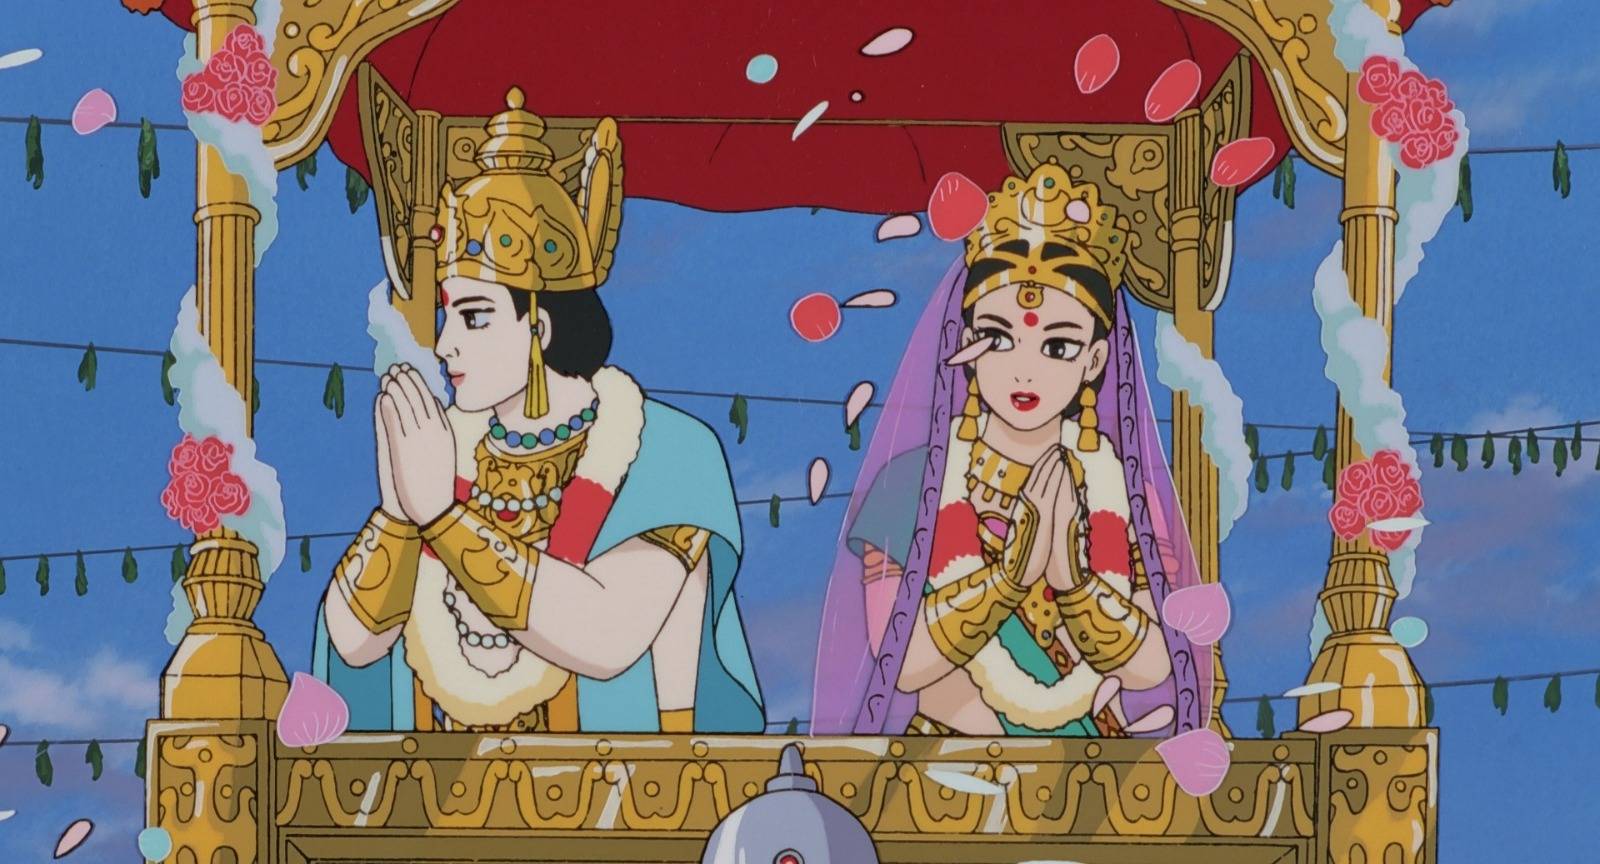 Groundbreaking 'Ramayana' anime remastered for new audience 30 ...